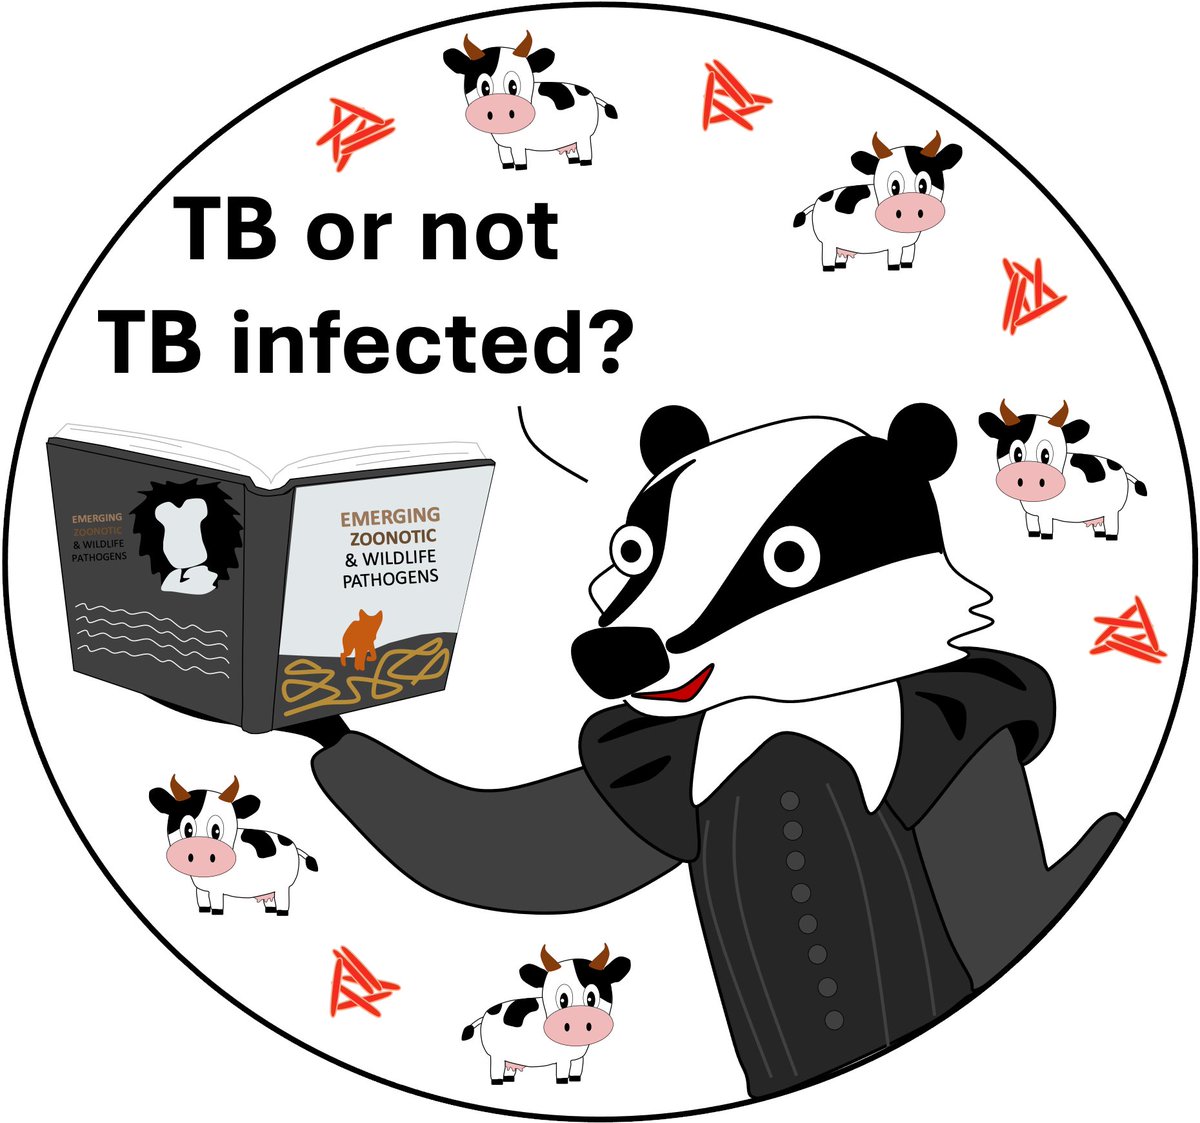 Am I badgering you about buying our new book? Maybe! Read about badgers, TB, and culling in Emerging Zoonotic and Wildlife Pathogens, available here: tinyurl.com/EZWPHard Repost this for a chance to win free stickers. We’ll mail them to one randomly selected reposter